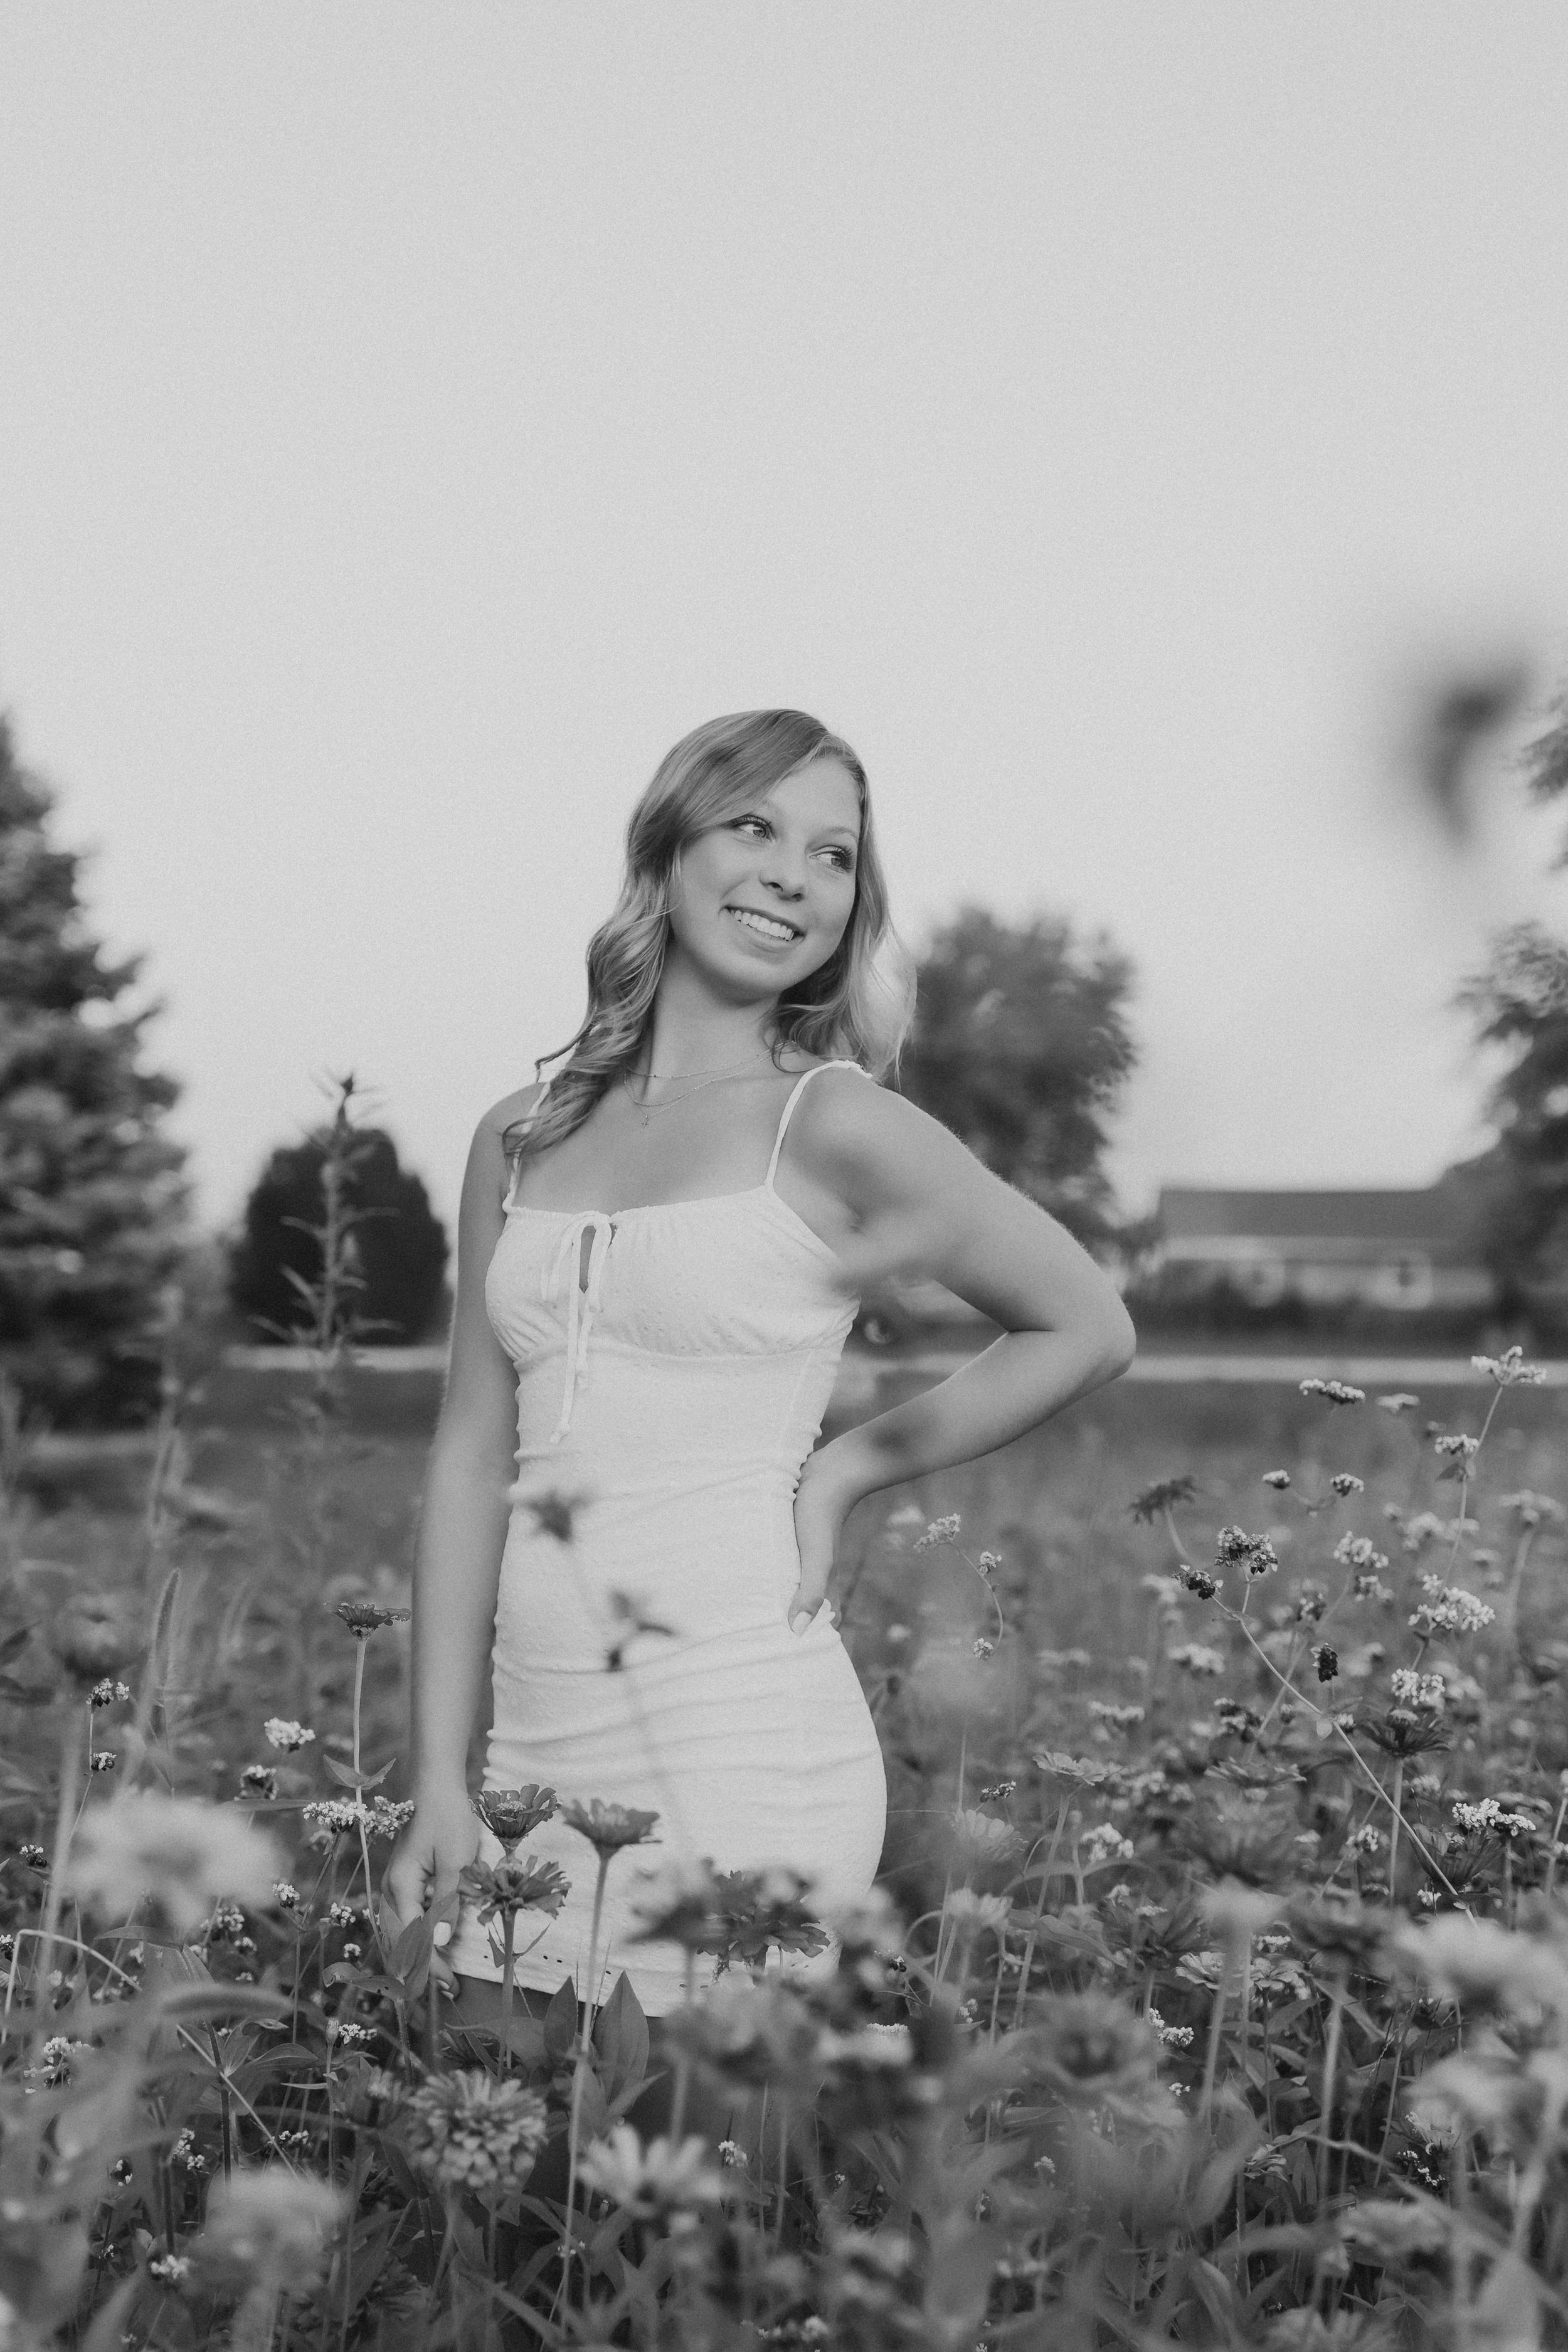  a black and white portrait of a young woman standing in a flower field  